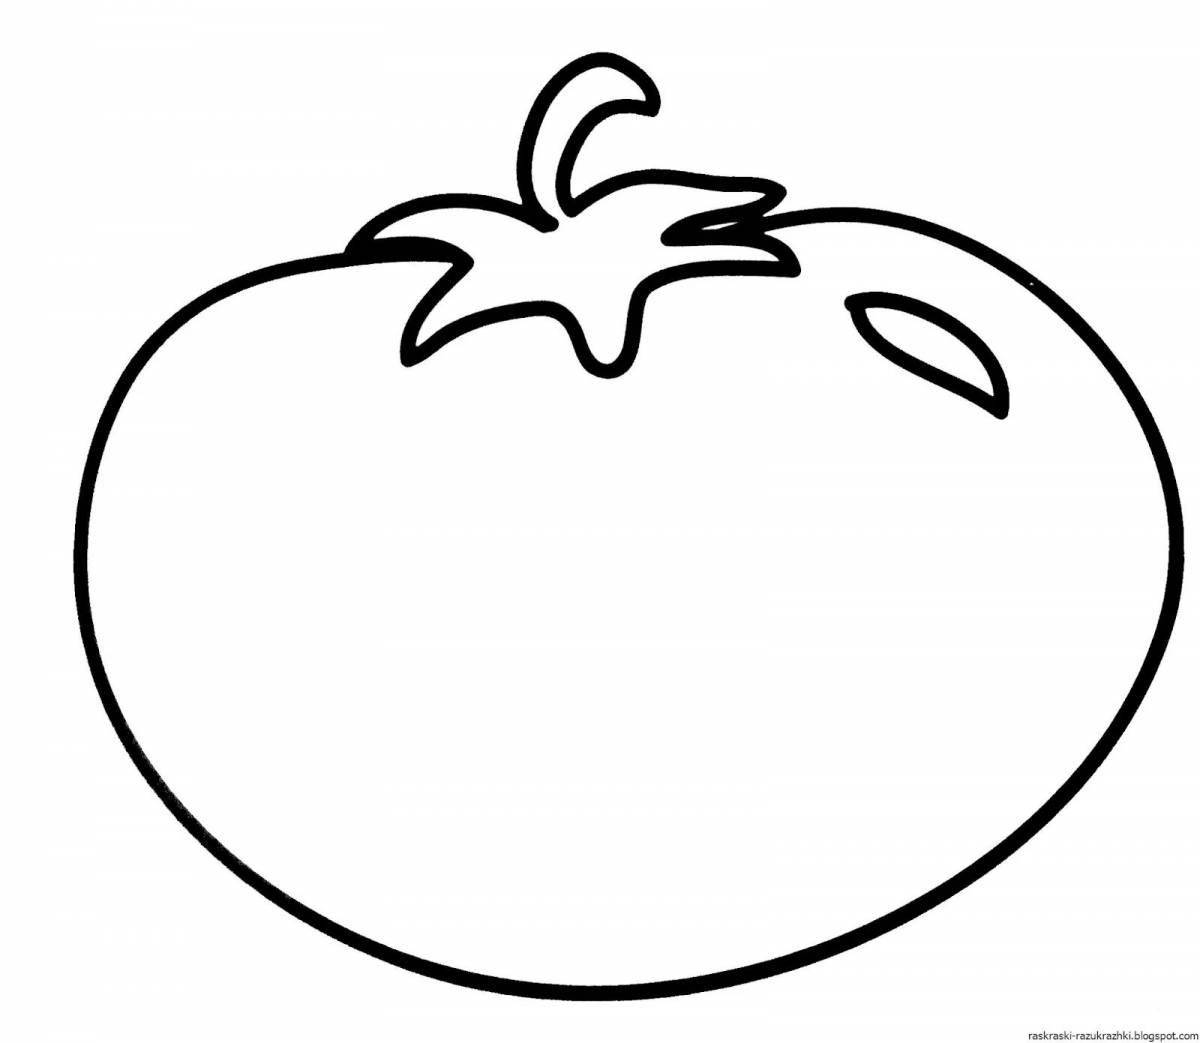 Awesome cucumber and tomato coloring pages for kids